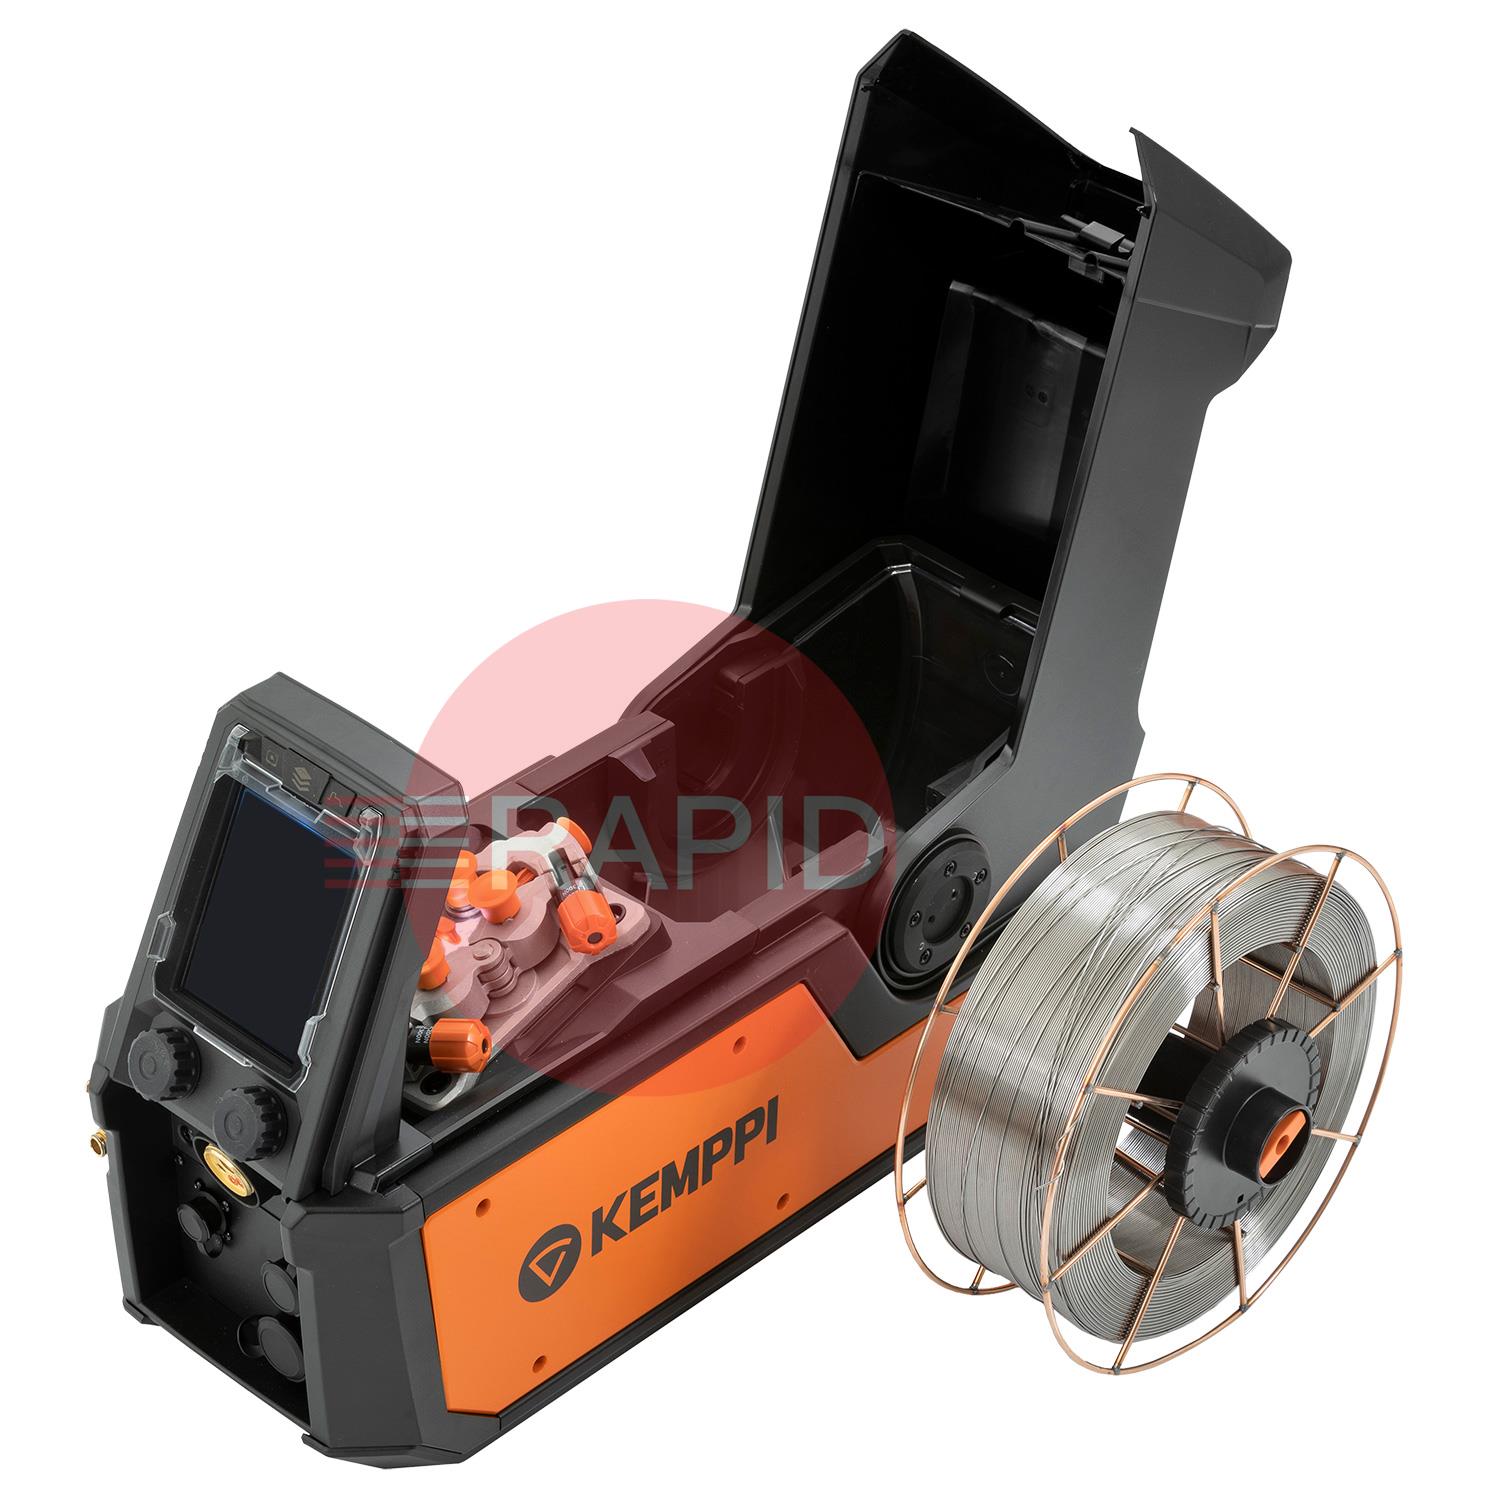 X5110400010SPKWC  Kemppi X5 FastMig 400 Synergic Water Cooled MIG Package, with GXe 405W 3.5m Torch - 400v, 3ph